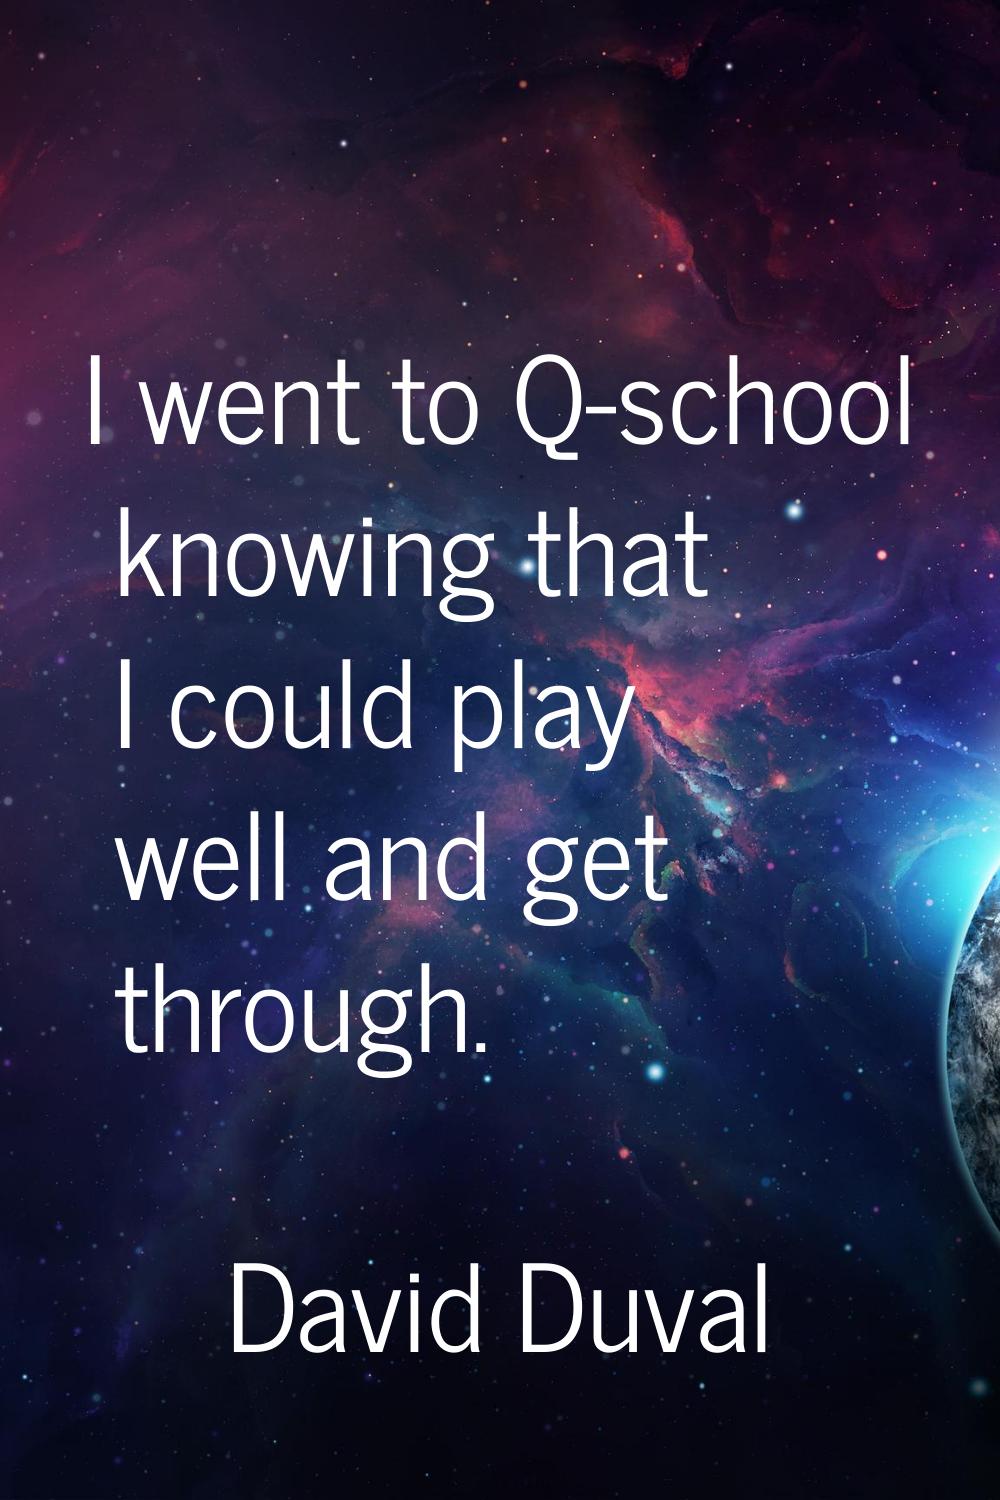 I went to Q-school knowing that I could play well and get through.